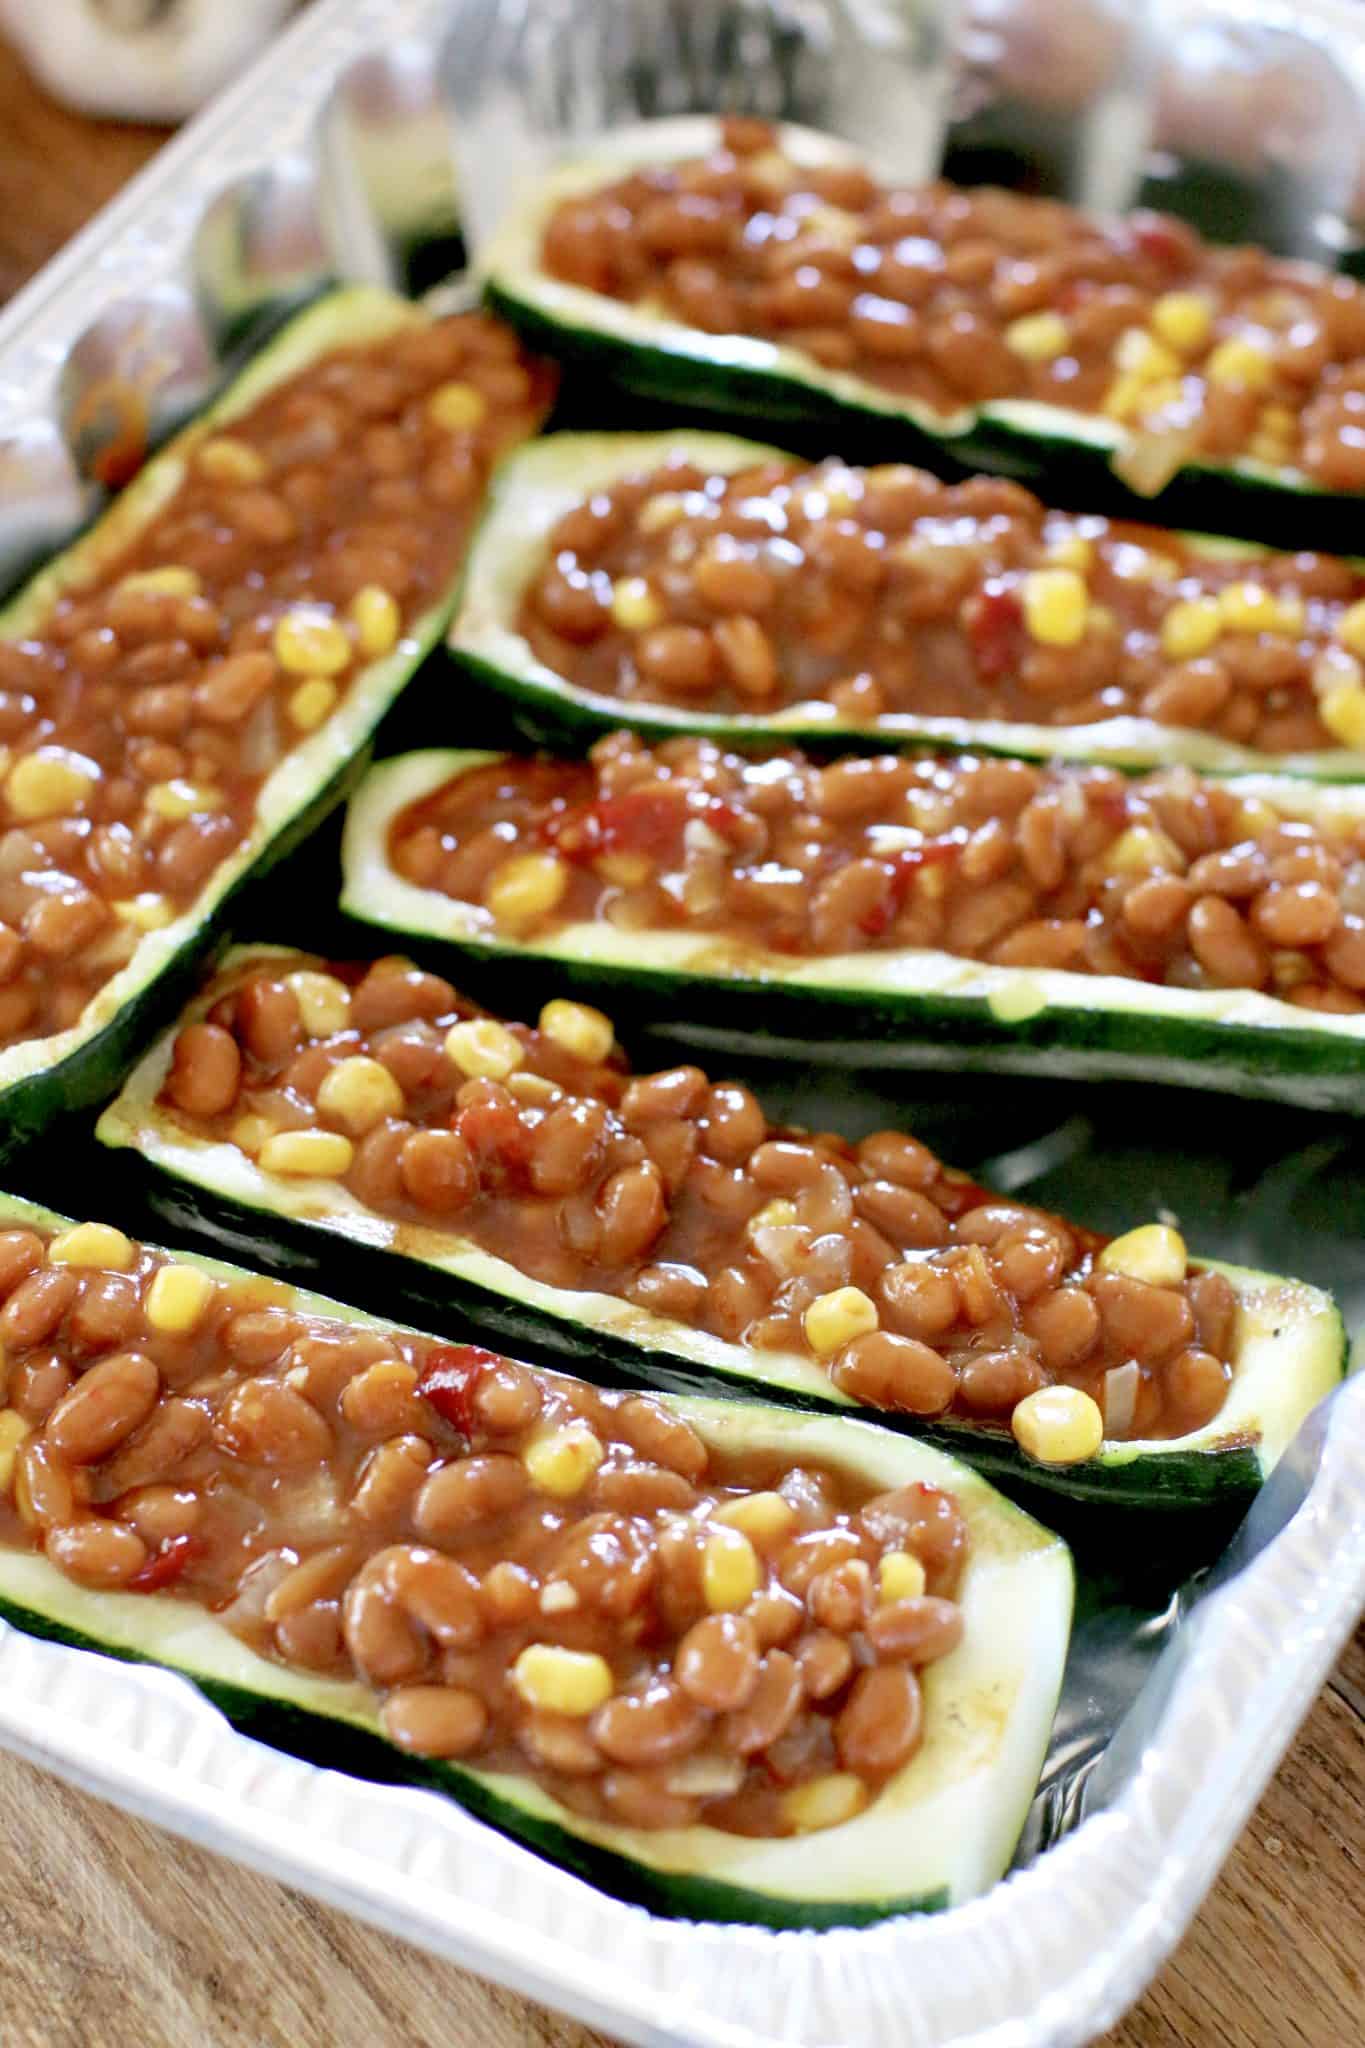 zucchini halves filled with bean mixture and placed into an aluminum  baking dish.